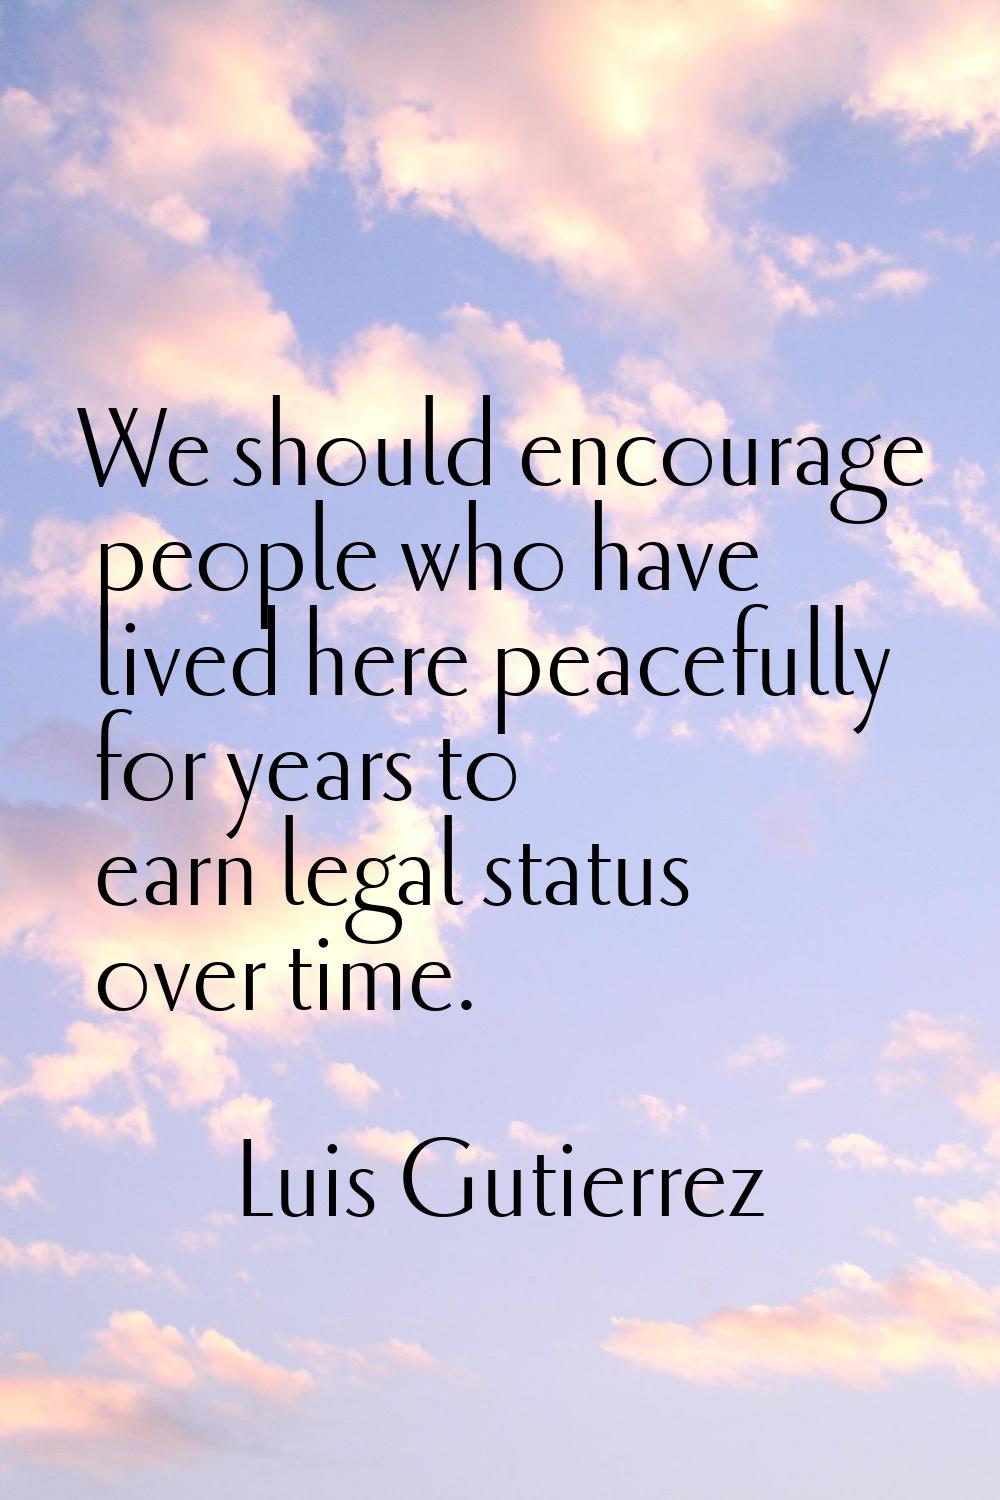 We should encourage people who have lived here peacefully for years to earn legal status over time.